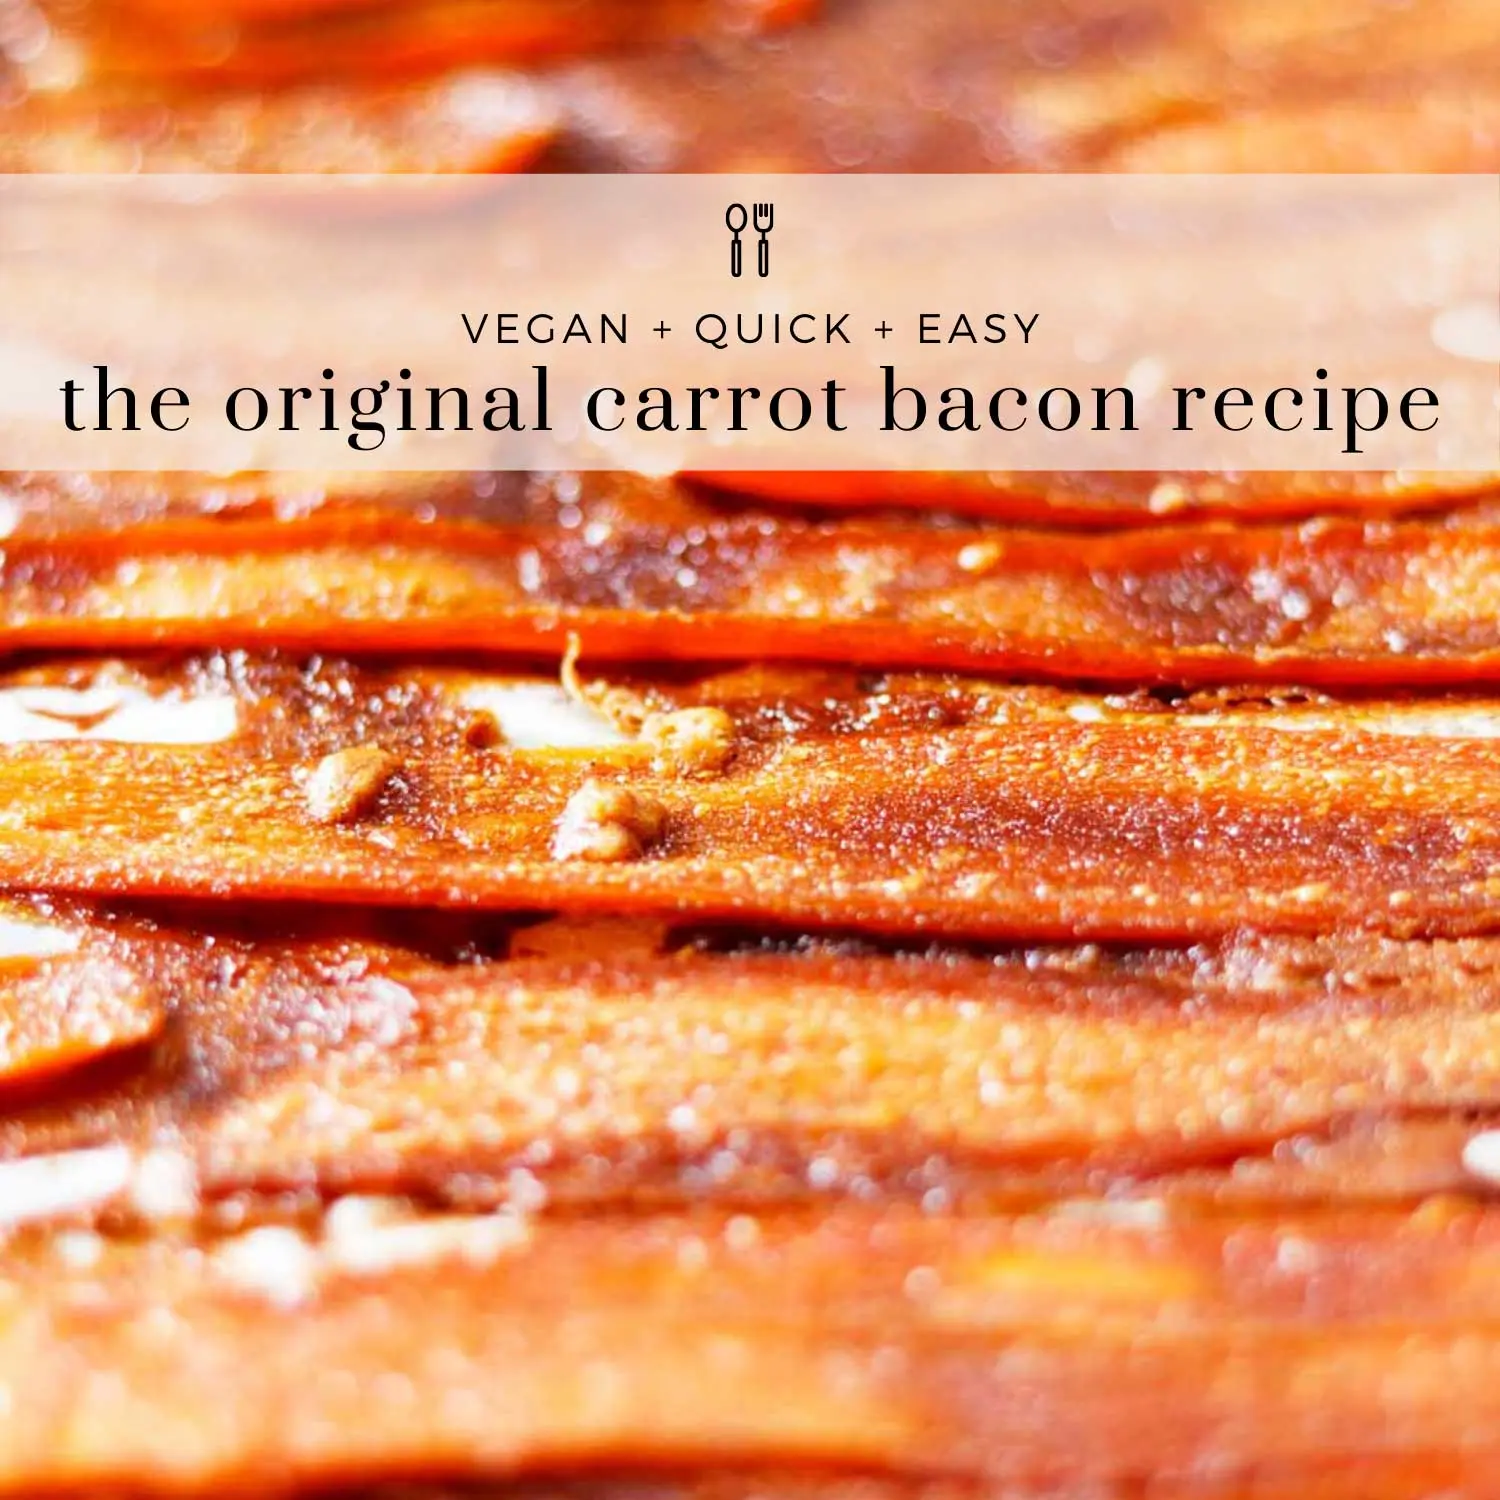 smoked carrot bacon - What is a vegetarian substitute for smoked bacon